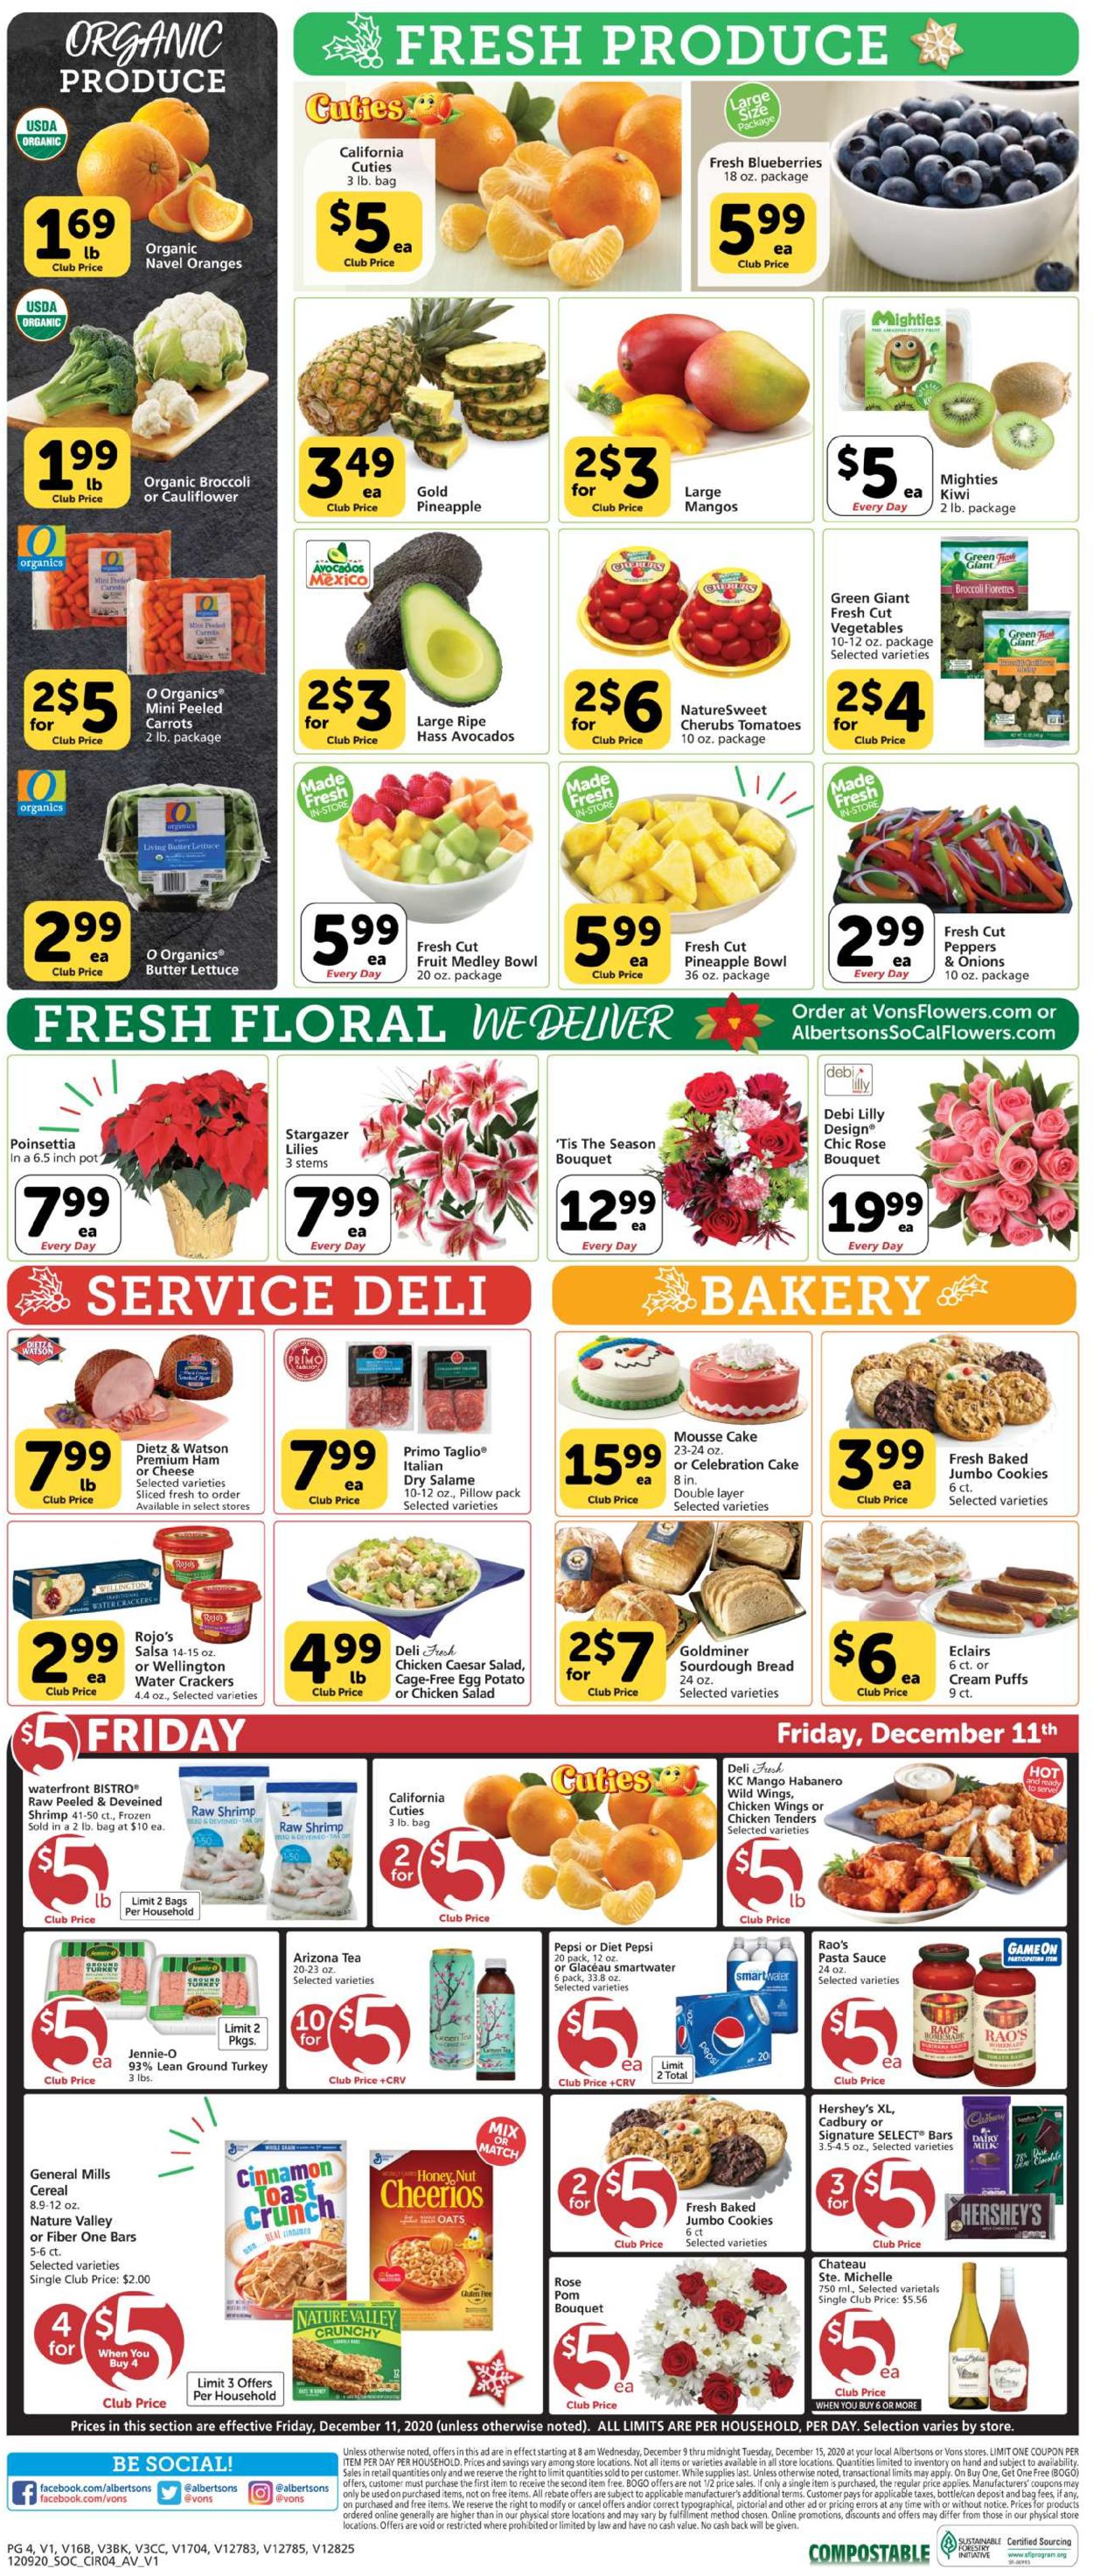 Vons Ad from 12/09/2020